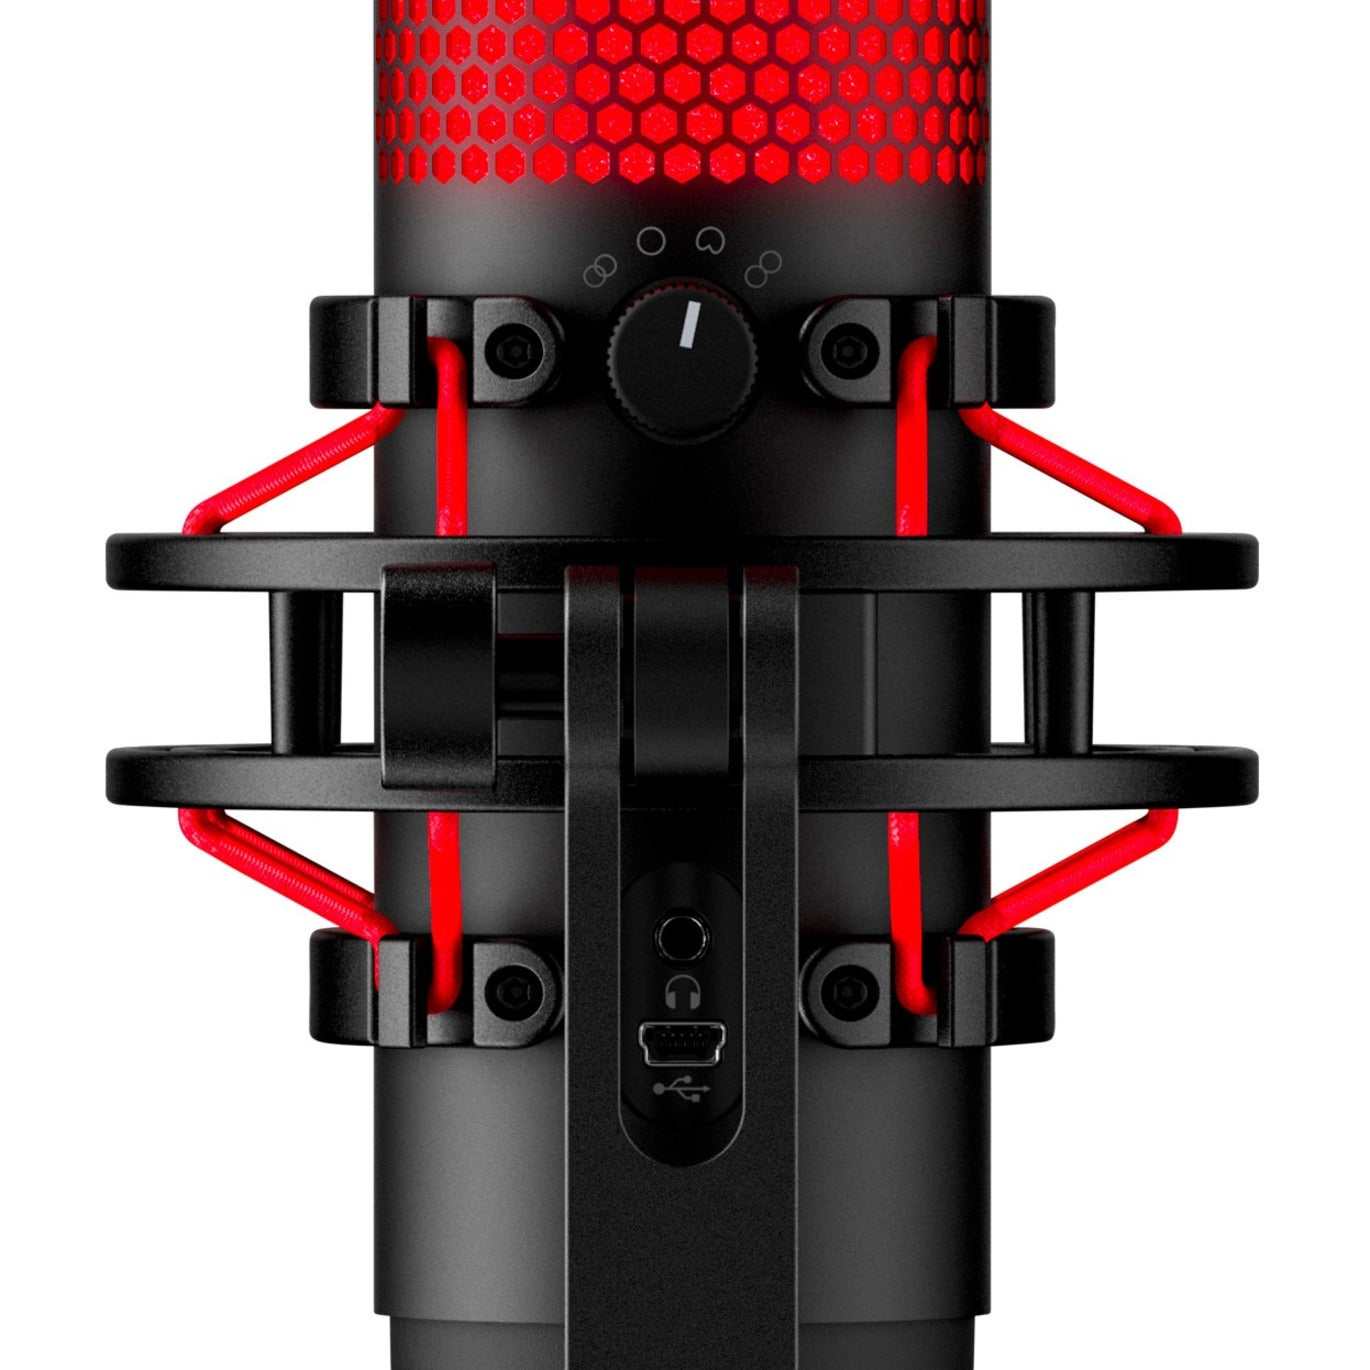 HyperX 4P5P6AA QuadCast Microphone - Black, Red, Electret Condenser, Mute and Polar Pattern Control